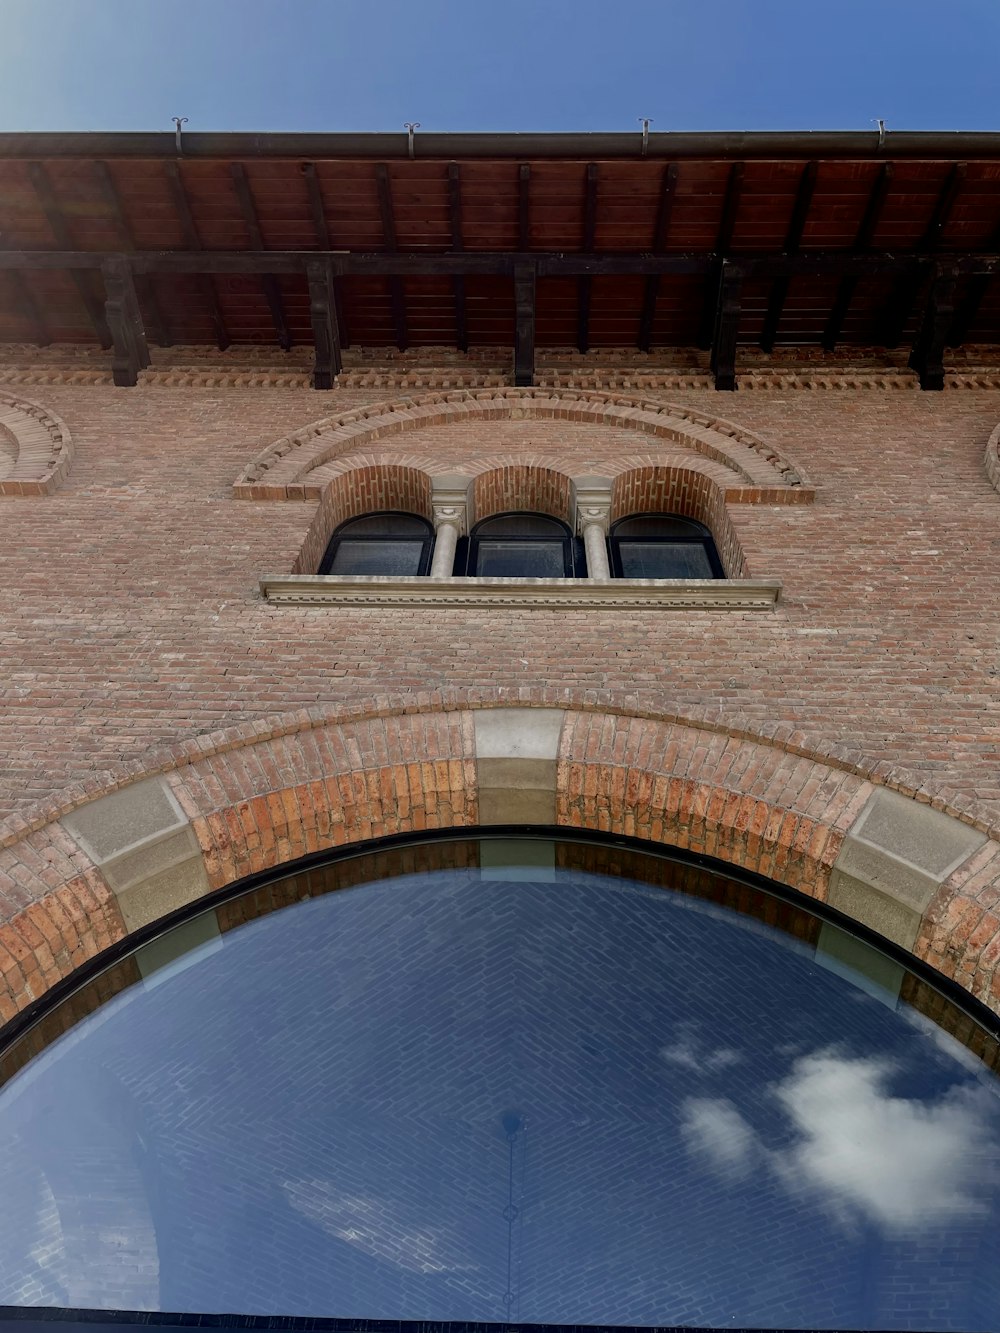 a brick building with arched windows and a sky background